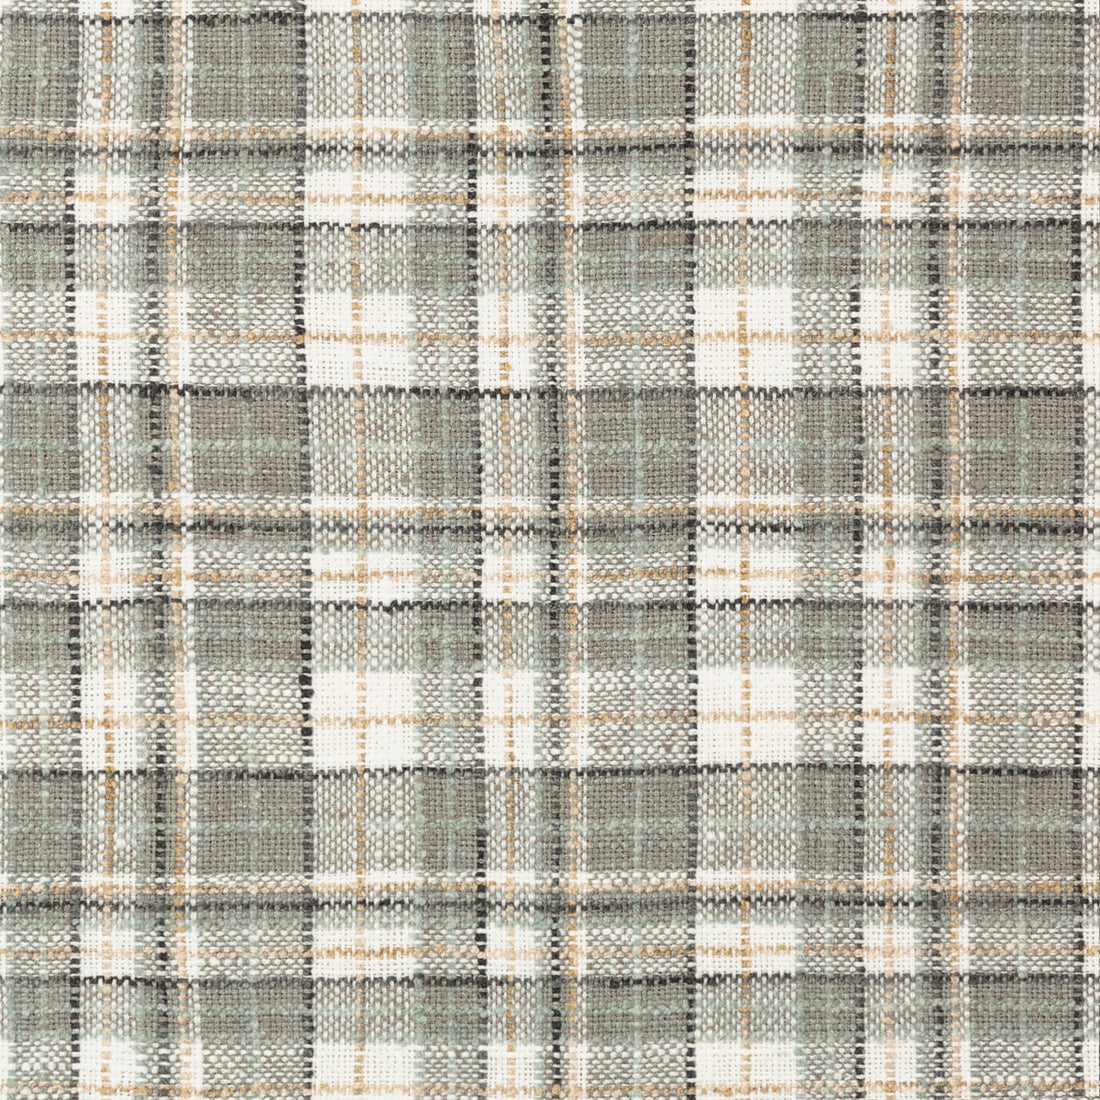 Pallepola fabric in smoke color - pattern 35770.1615.0 - by Kravet Basics in the Ceylon collection